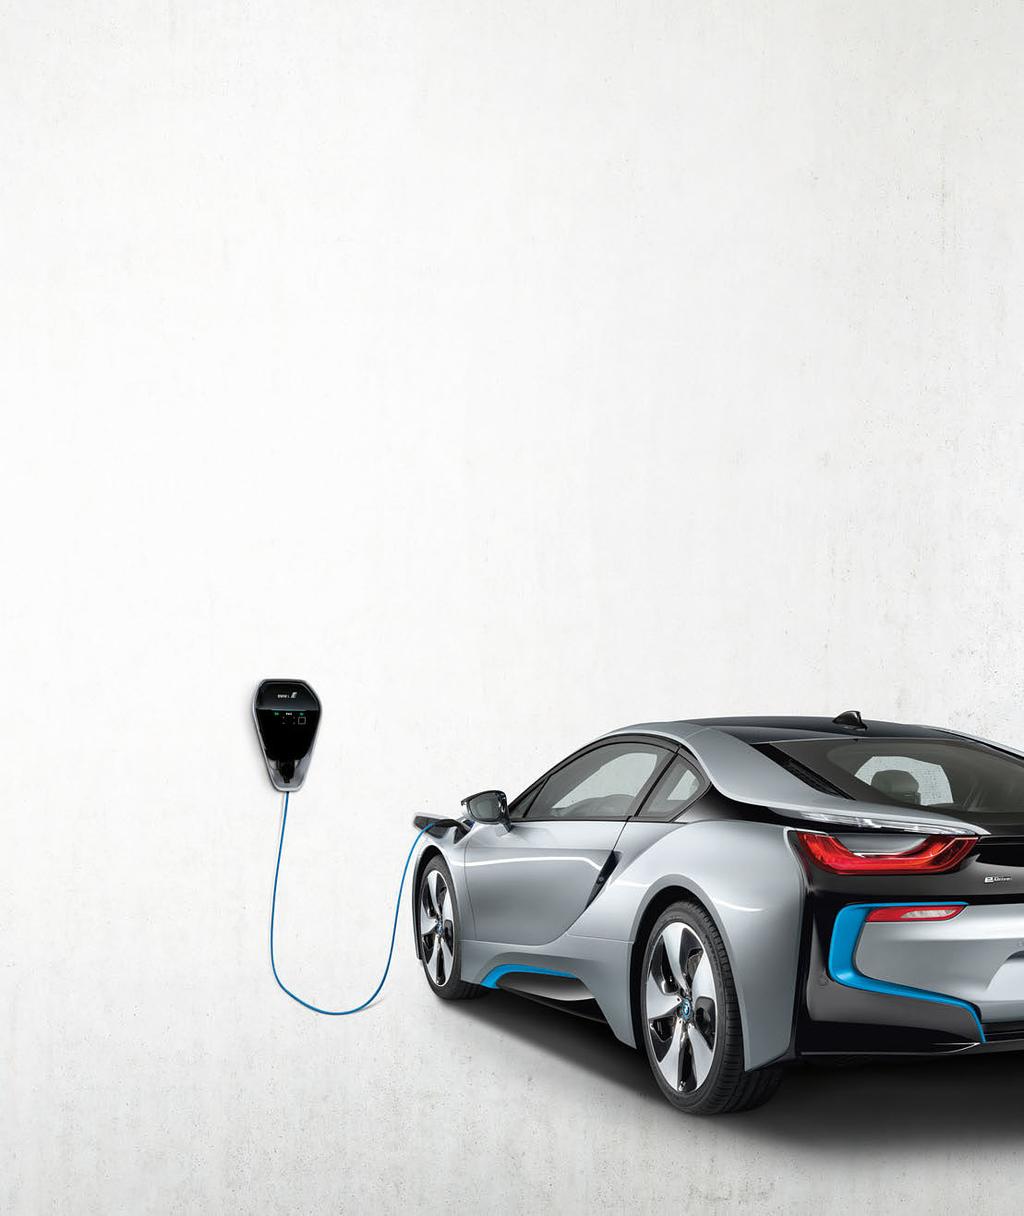 The BMW i8 can deploy its reserves of power through all four wheels for added traction and control.